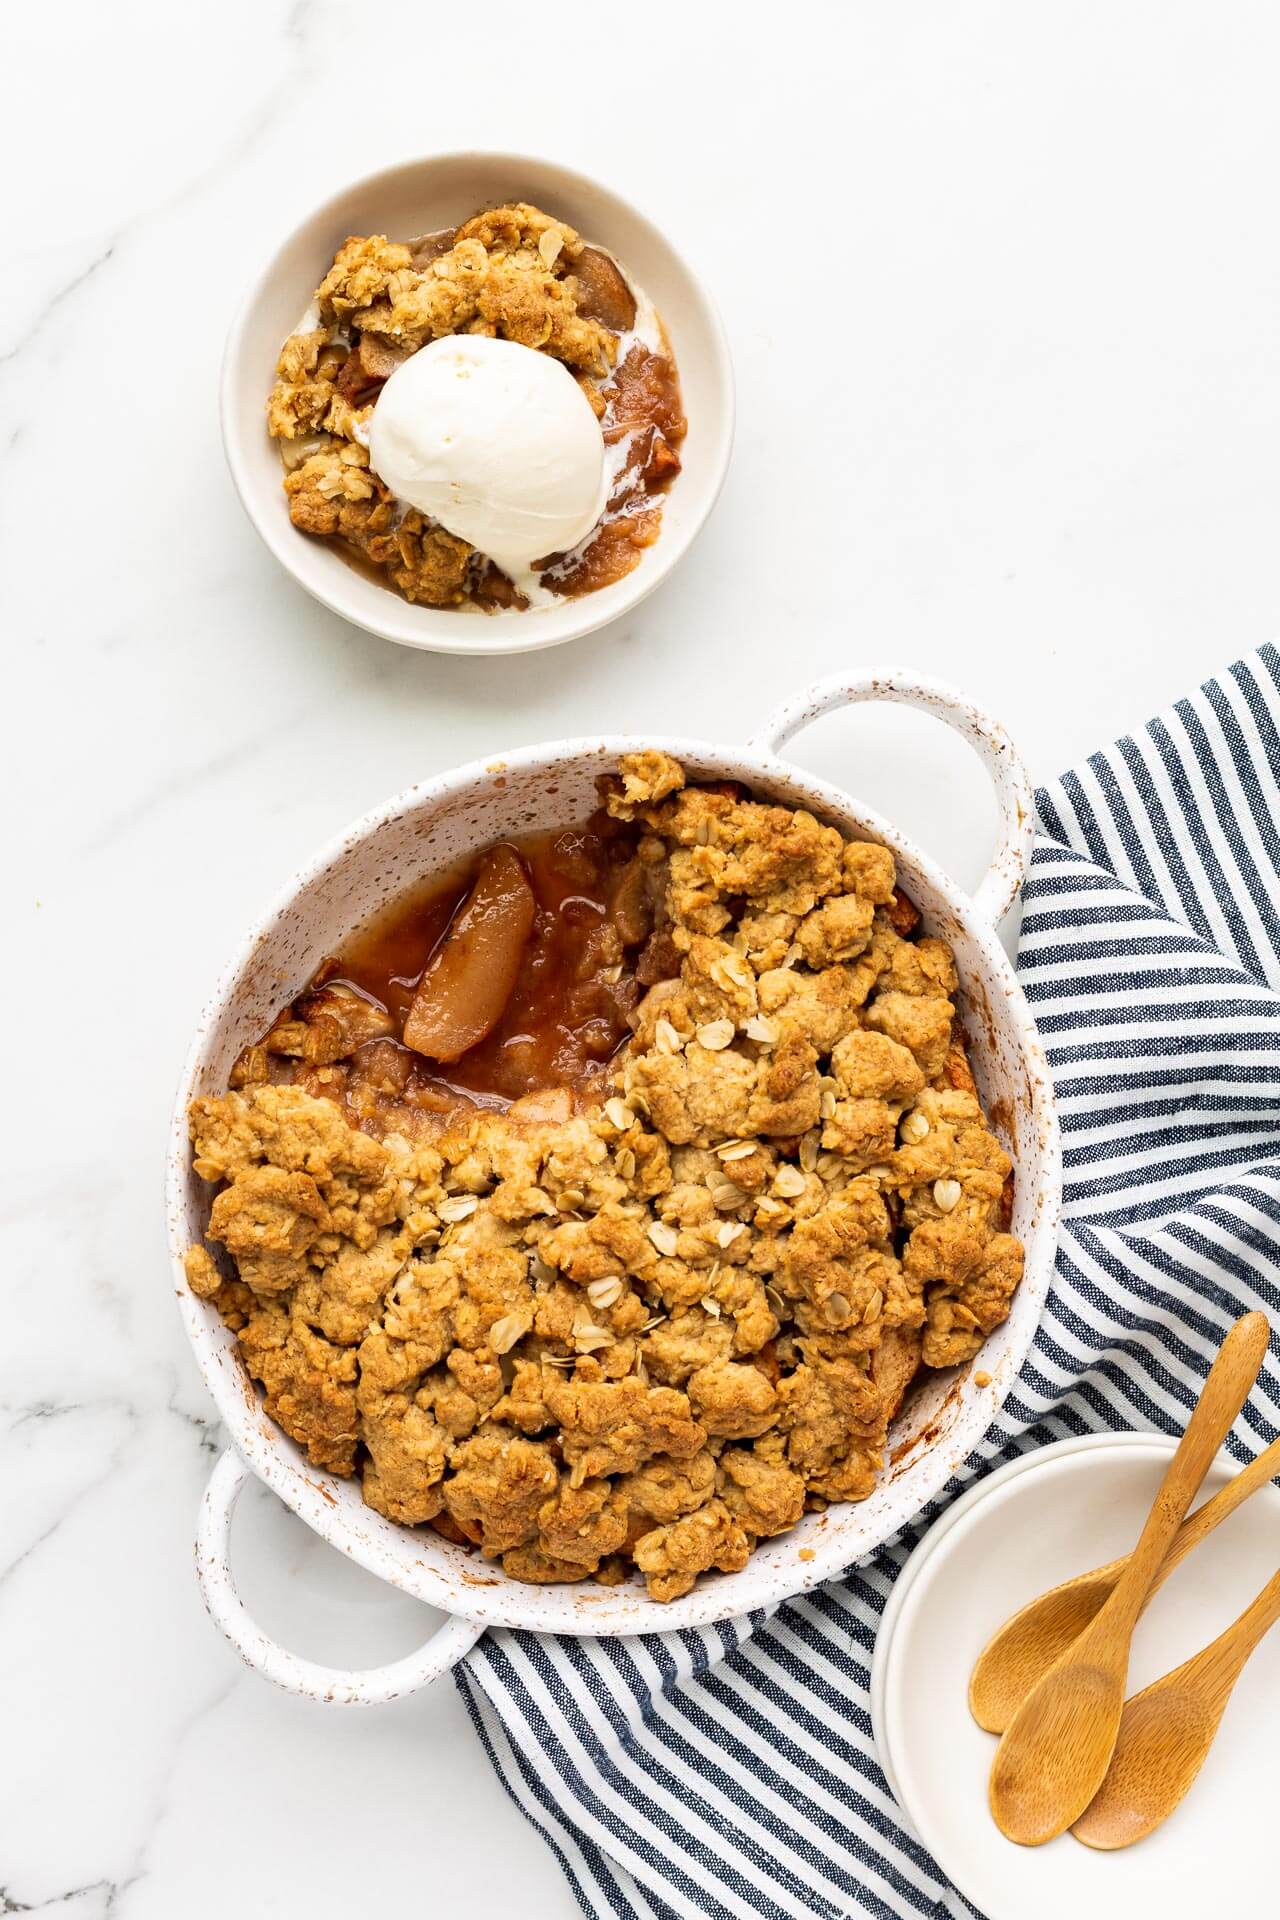 Serving a round white speckled baking dish of apple crisp into white bowls with wooden spoons and blue and white linen